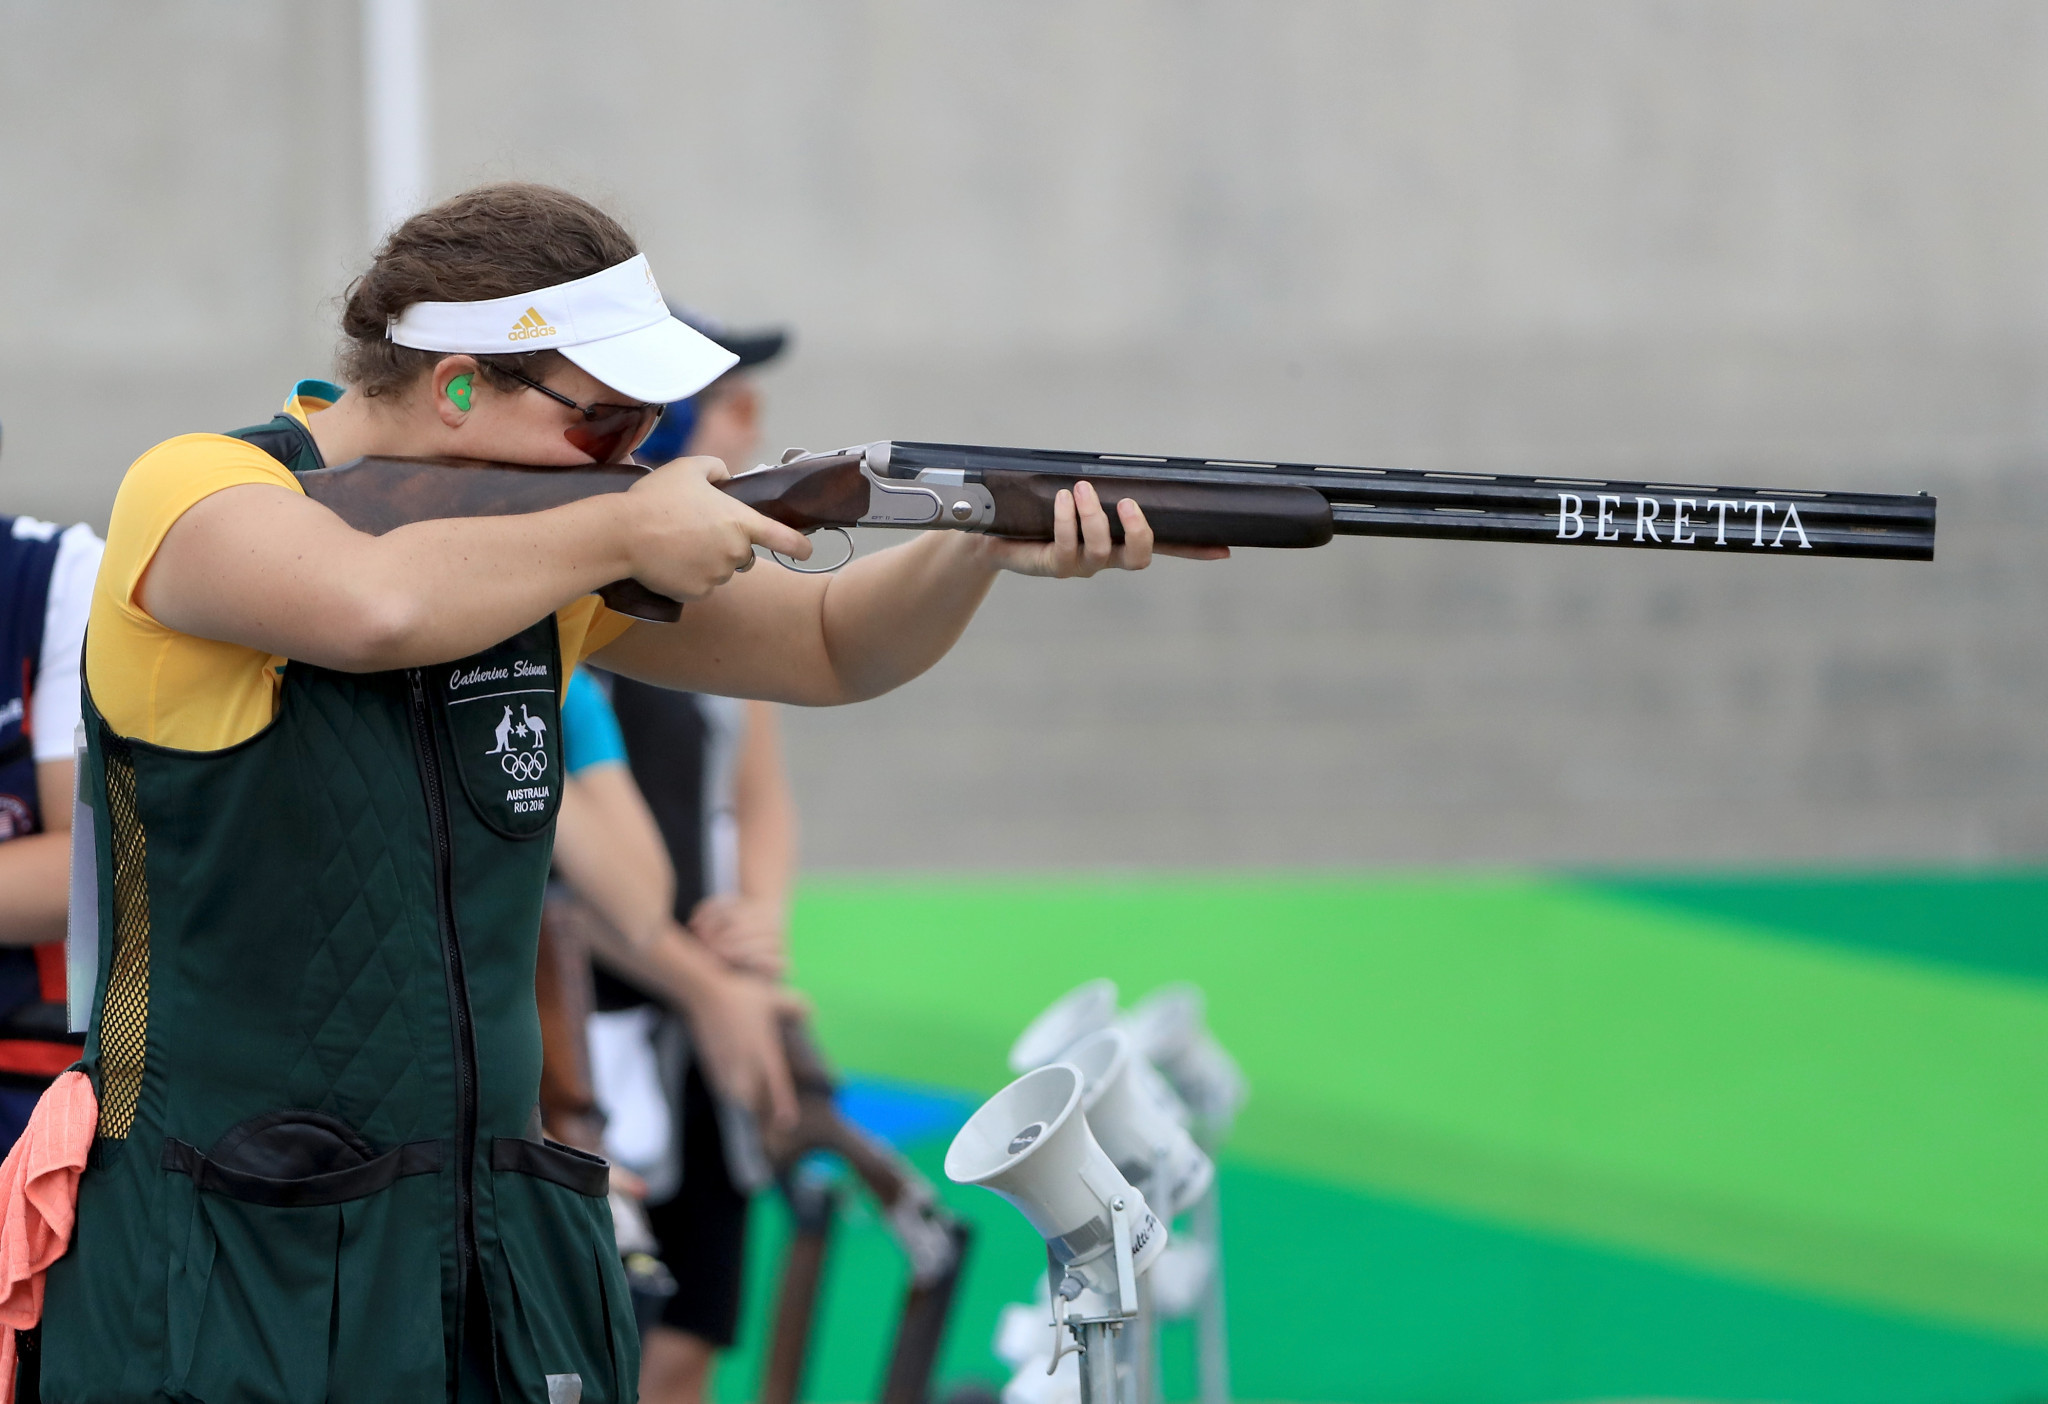 Australia's Catherine Skinner finished second on the first day of women's trap qualification ©Getty Images